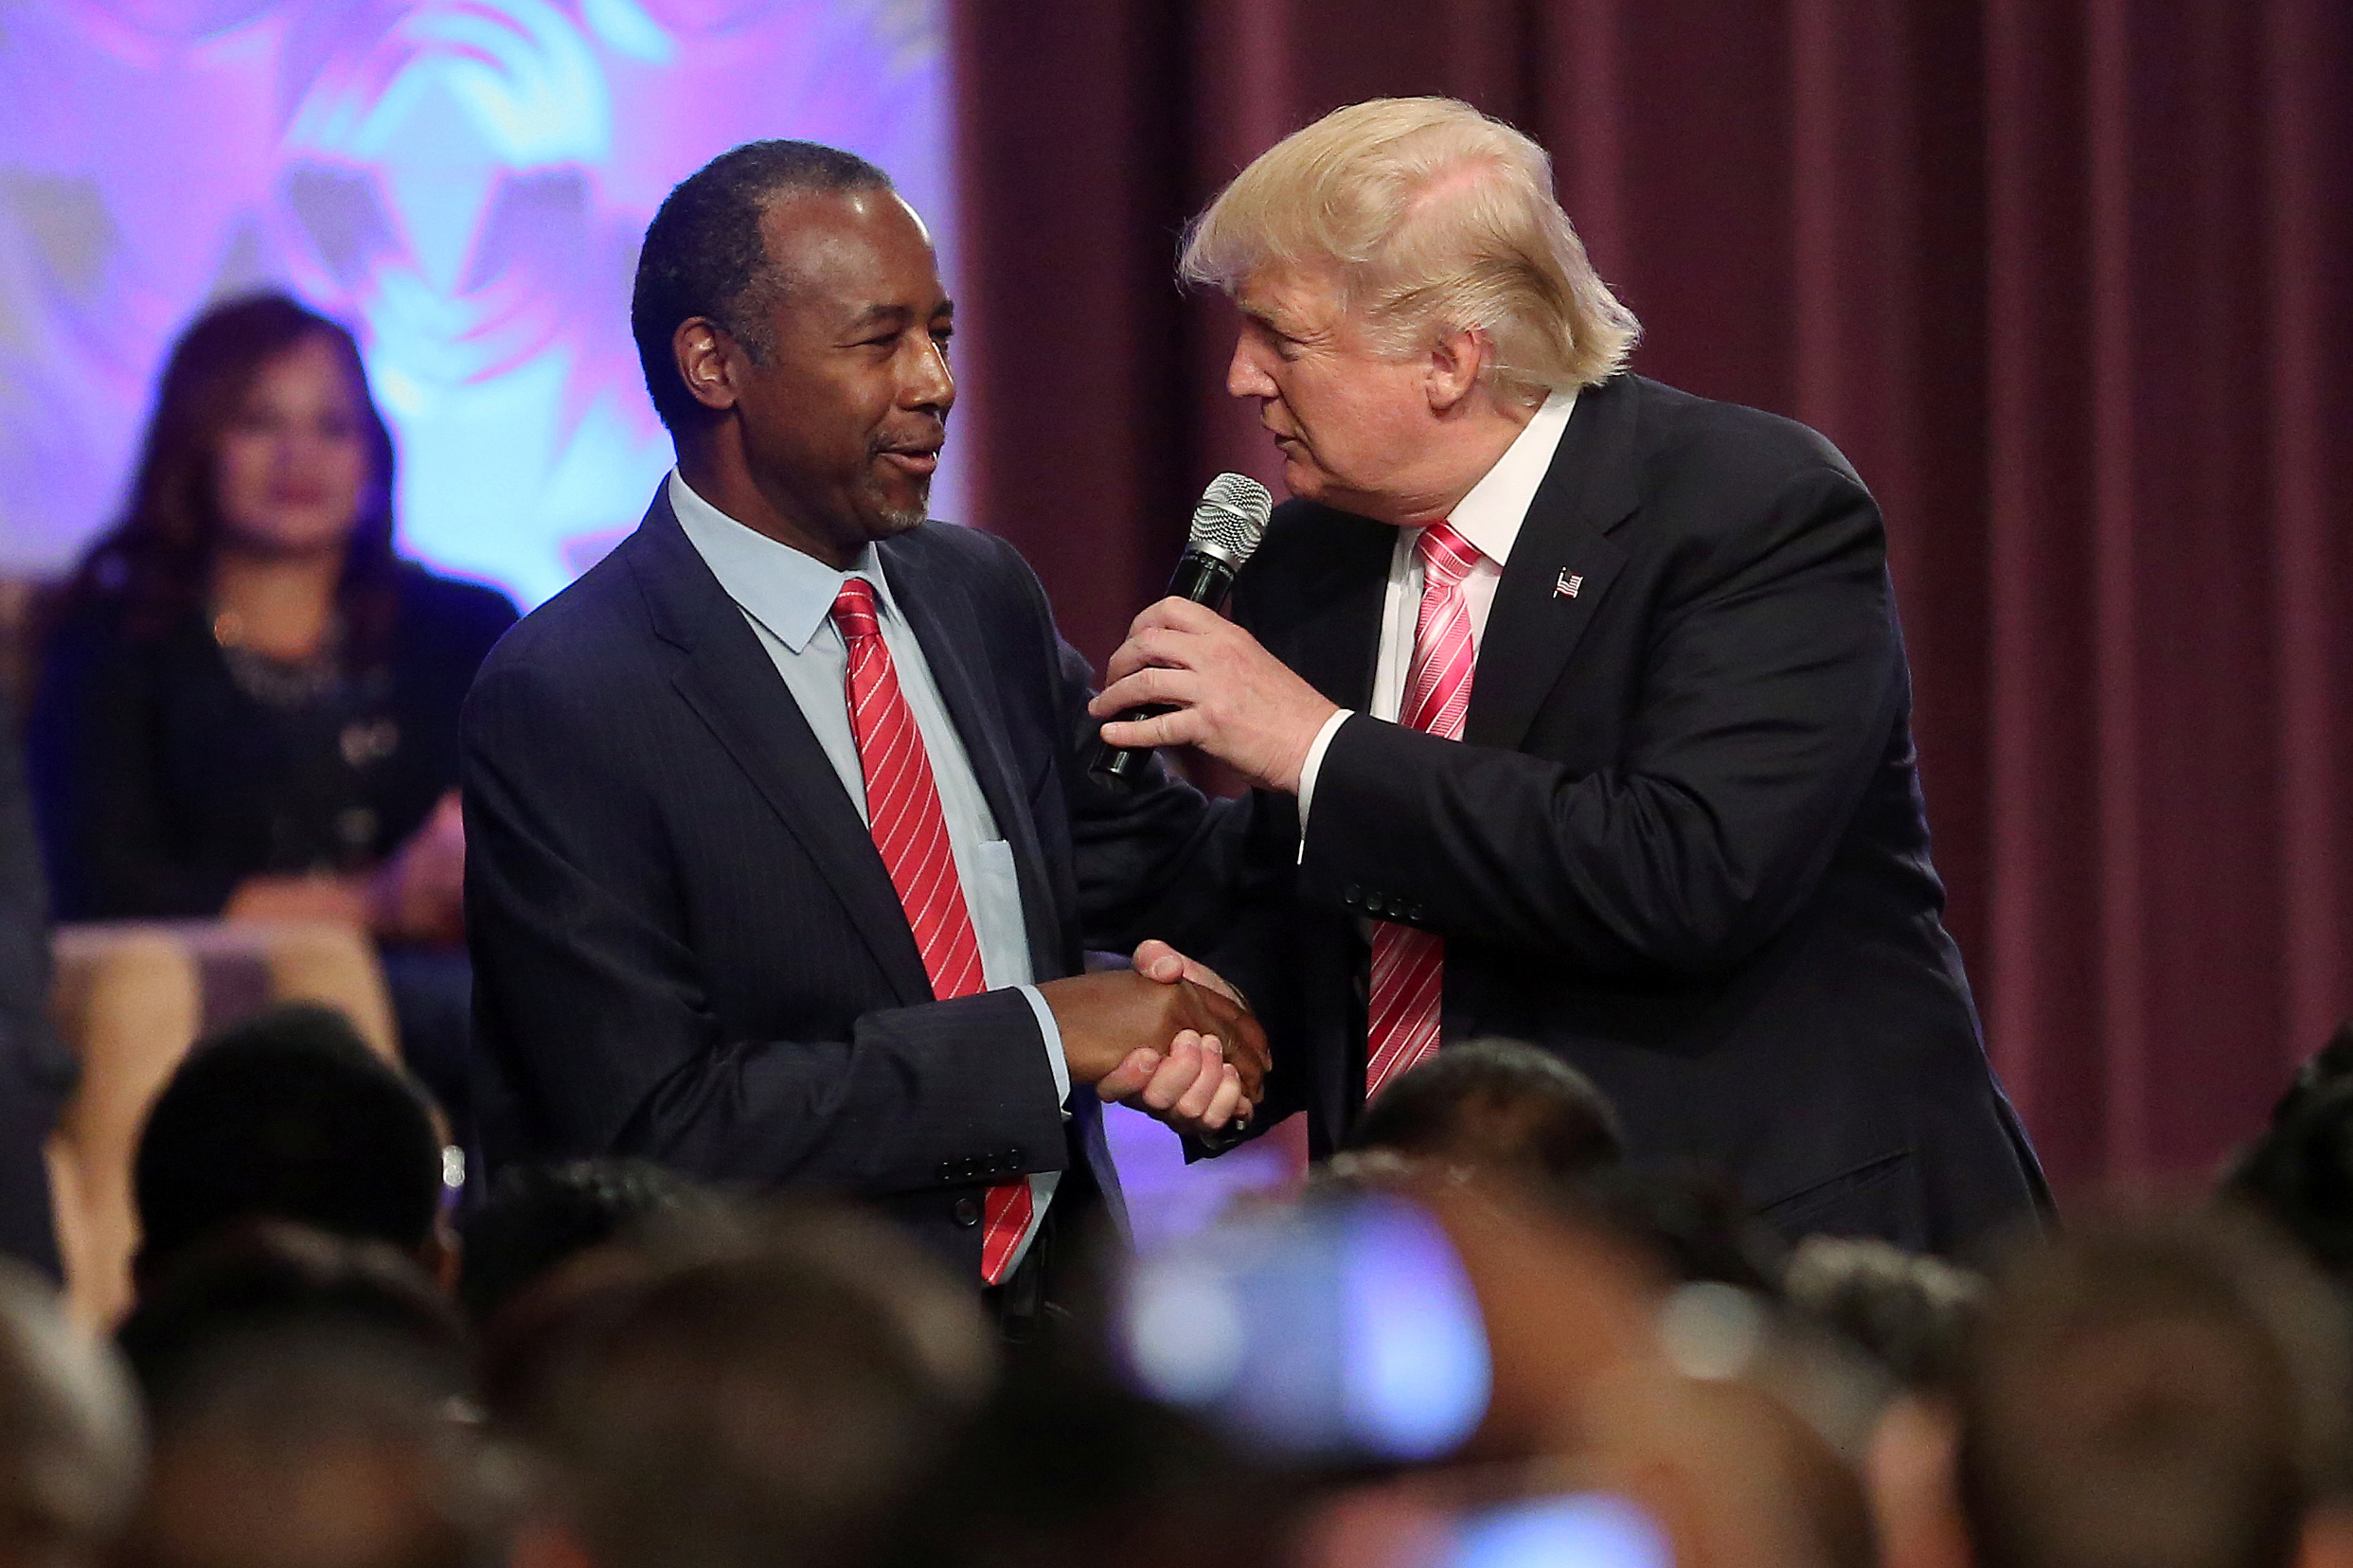 PHOTO: Republican presidential nominee Donald Trump shakes hands with Ben Carson as he attends a church service in Detroit, Michigan, Sept. 3, 2016. 